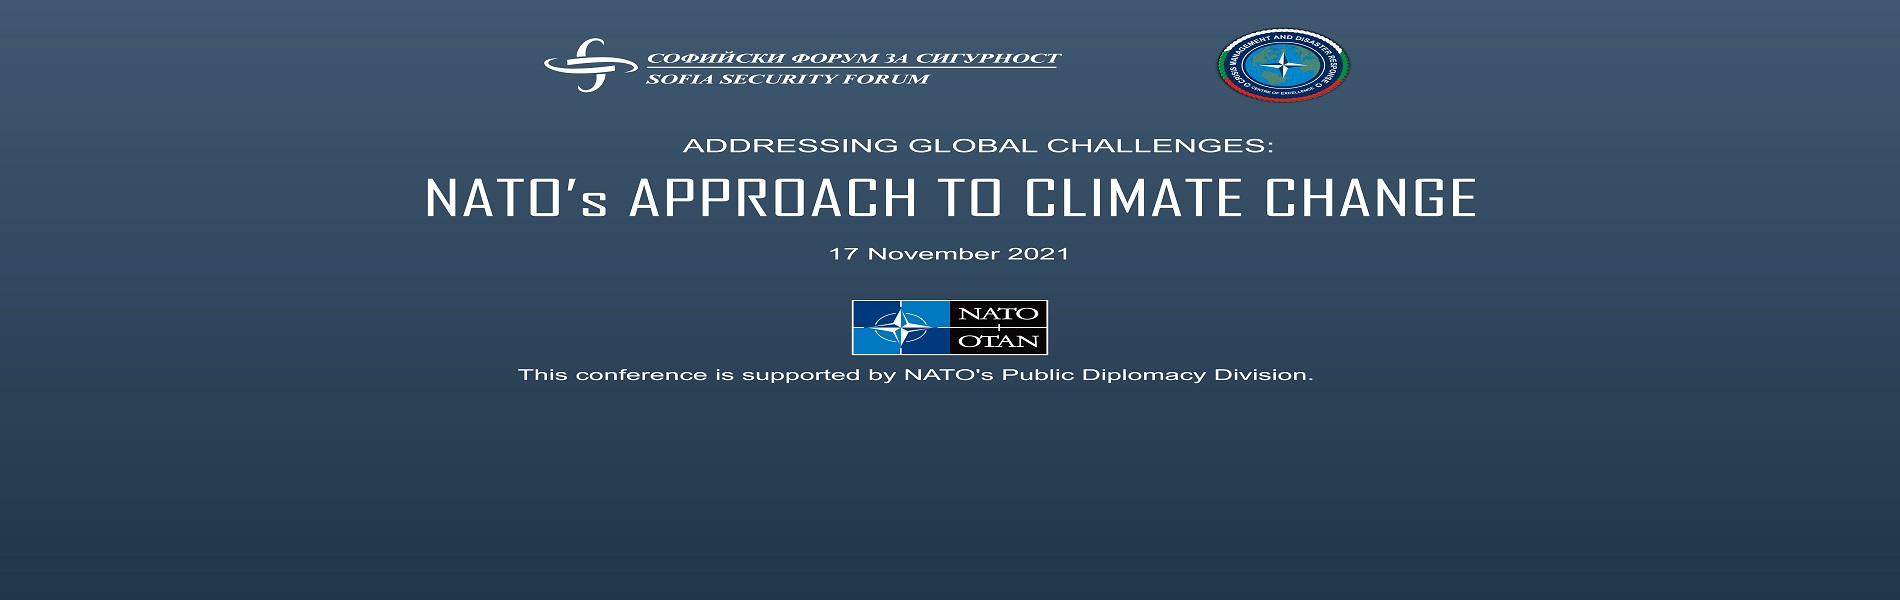 Online International Conference Addressing global challenges: NATO′s approach to climate change, 17 November 2021